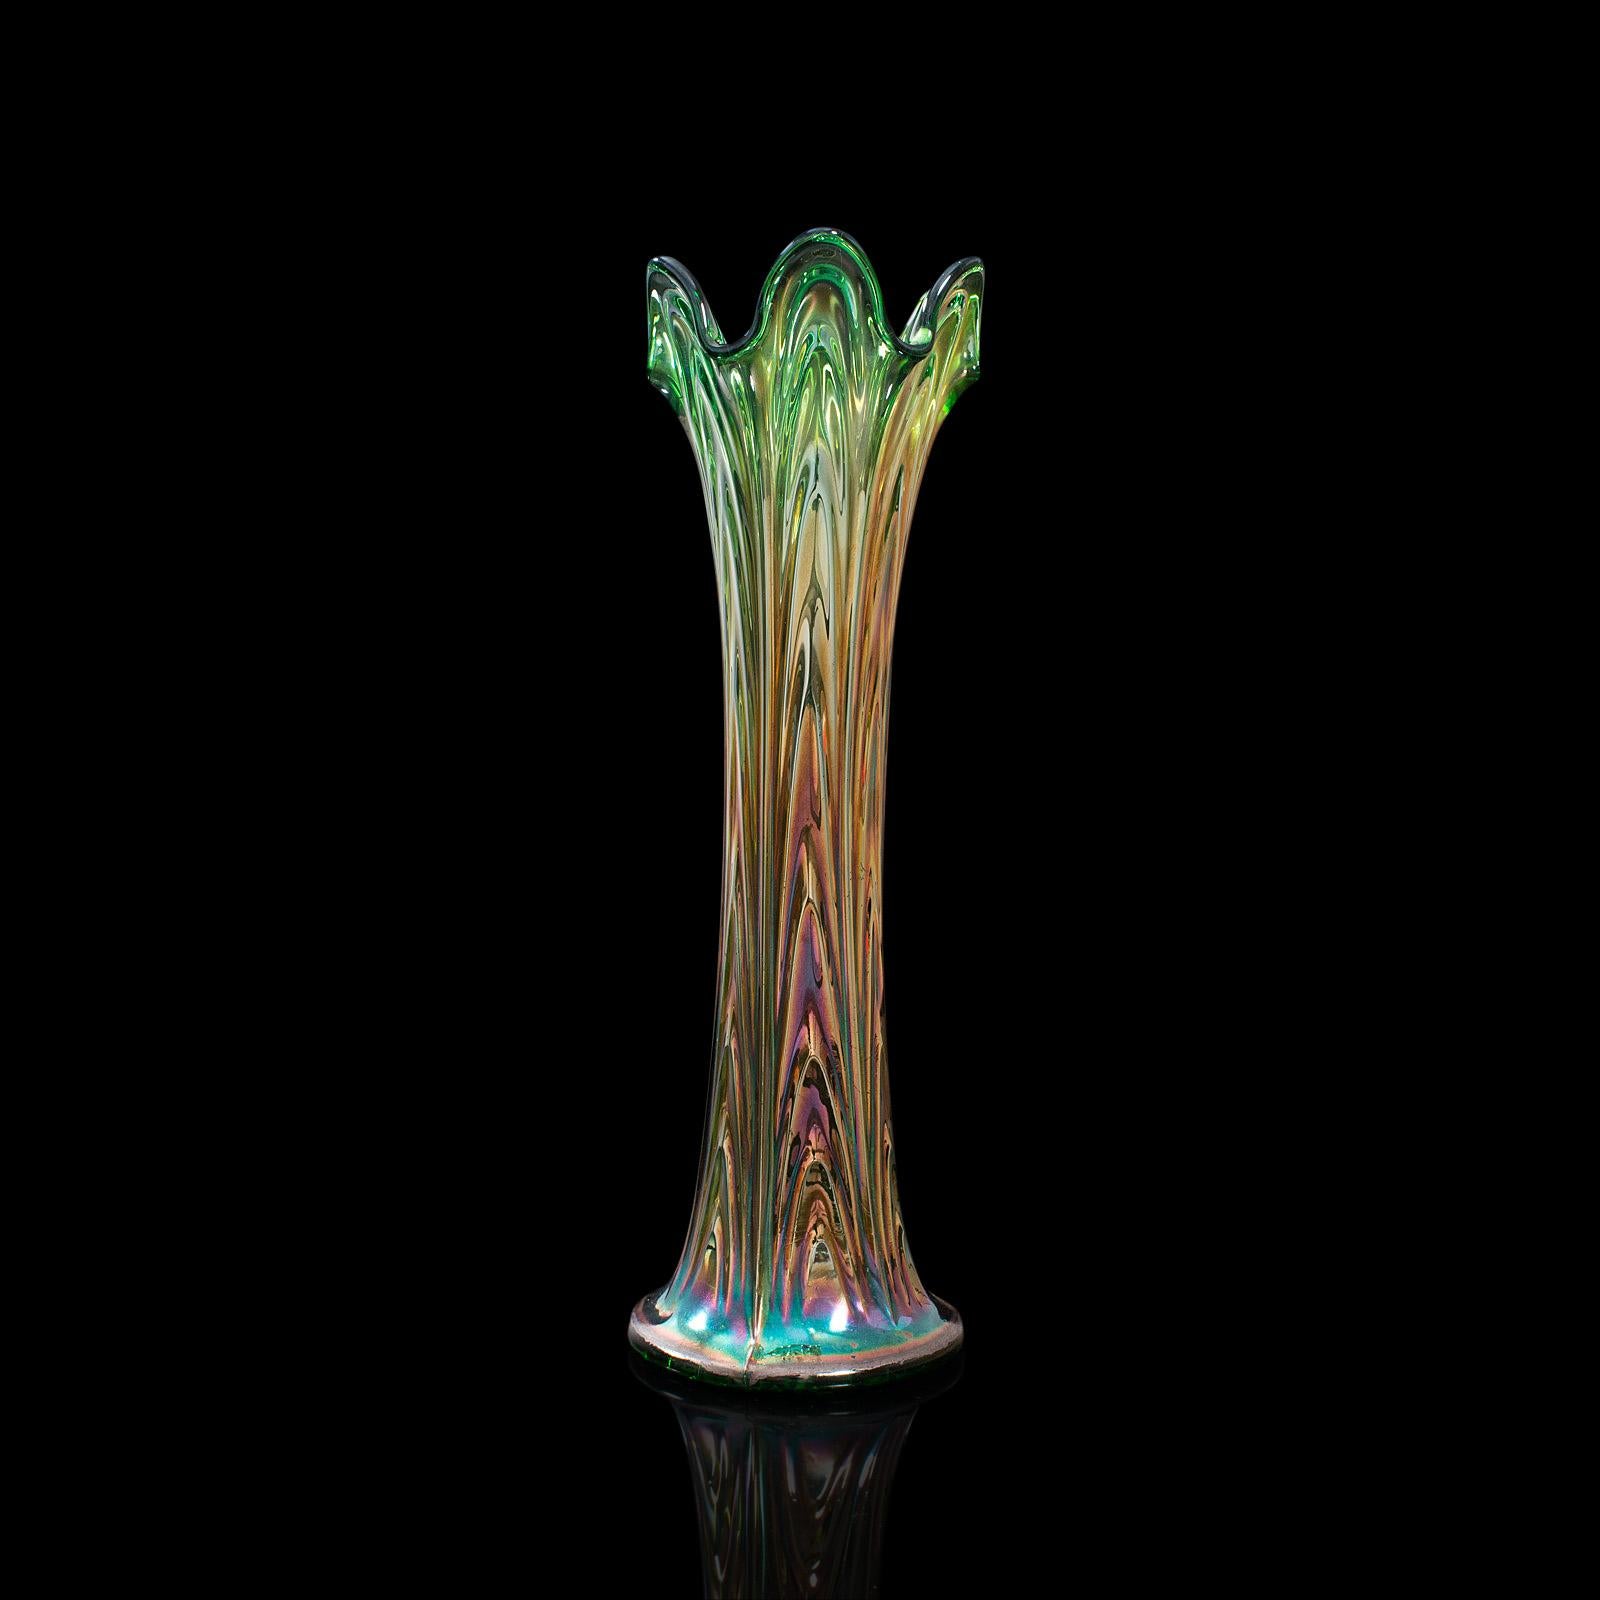 British Vintage Flower Vase, English, Carnival Glass, Fluted, Early 20th Century, 1930